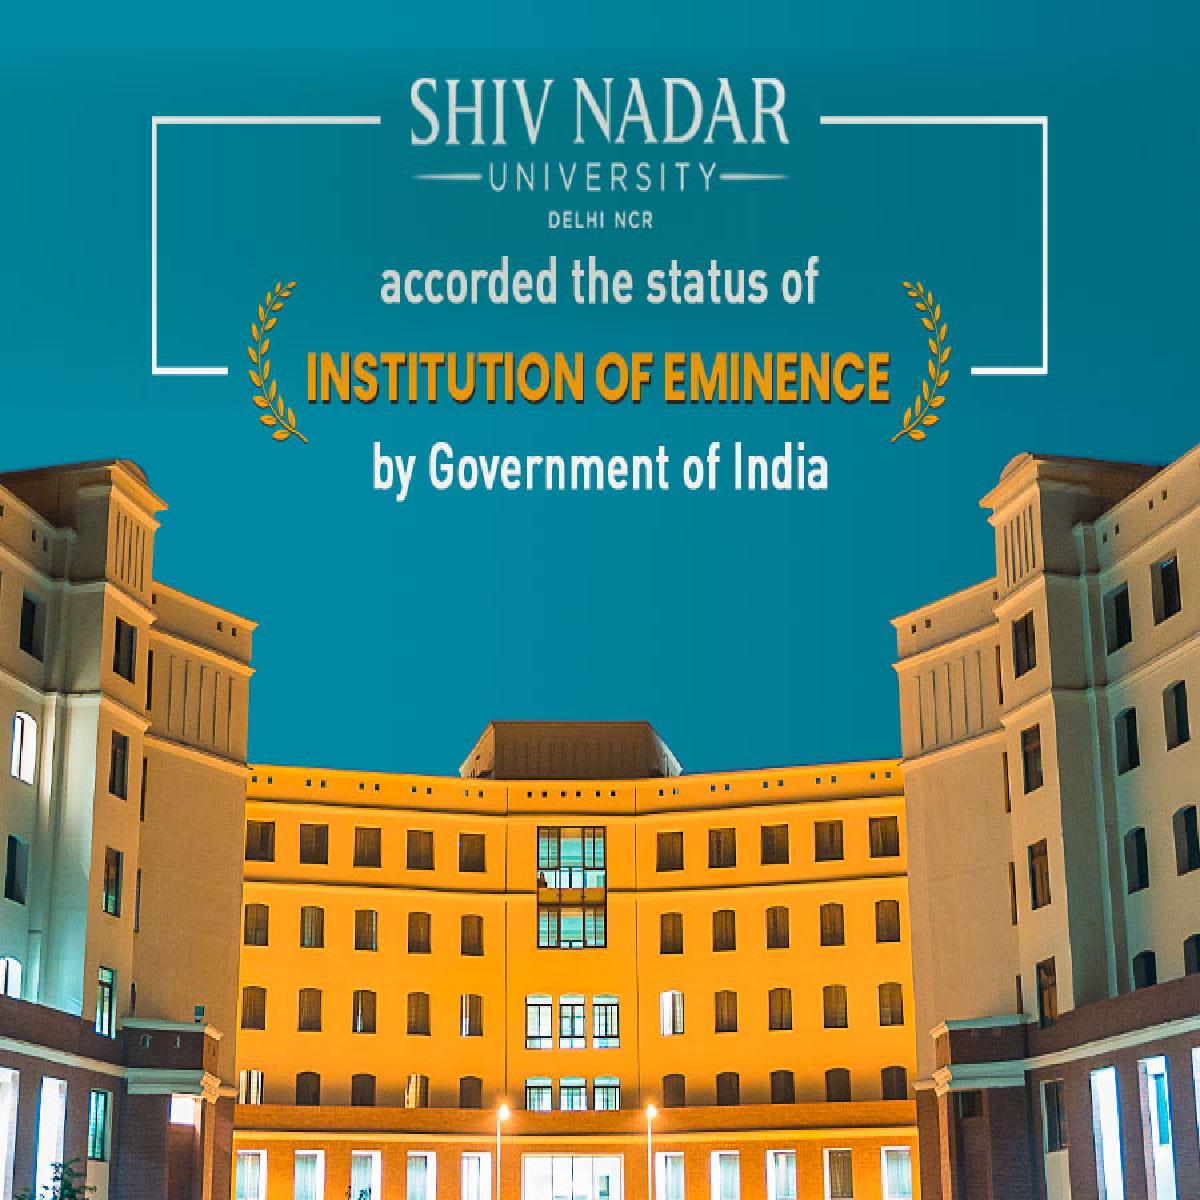 Shiv Nadar University Delhi NCR Conferred the Title of Shiv Nadar Institution of Eminence by Ministry of Education Government of India